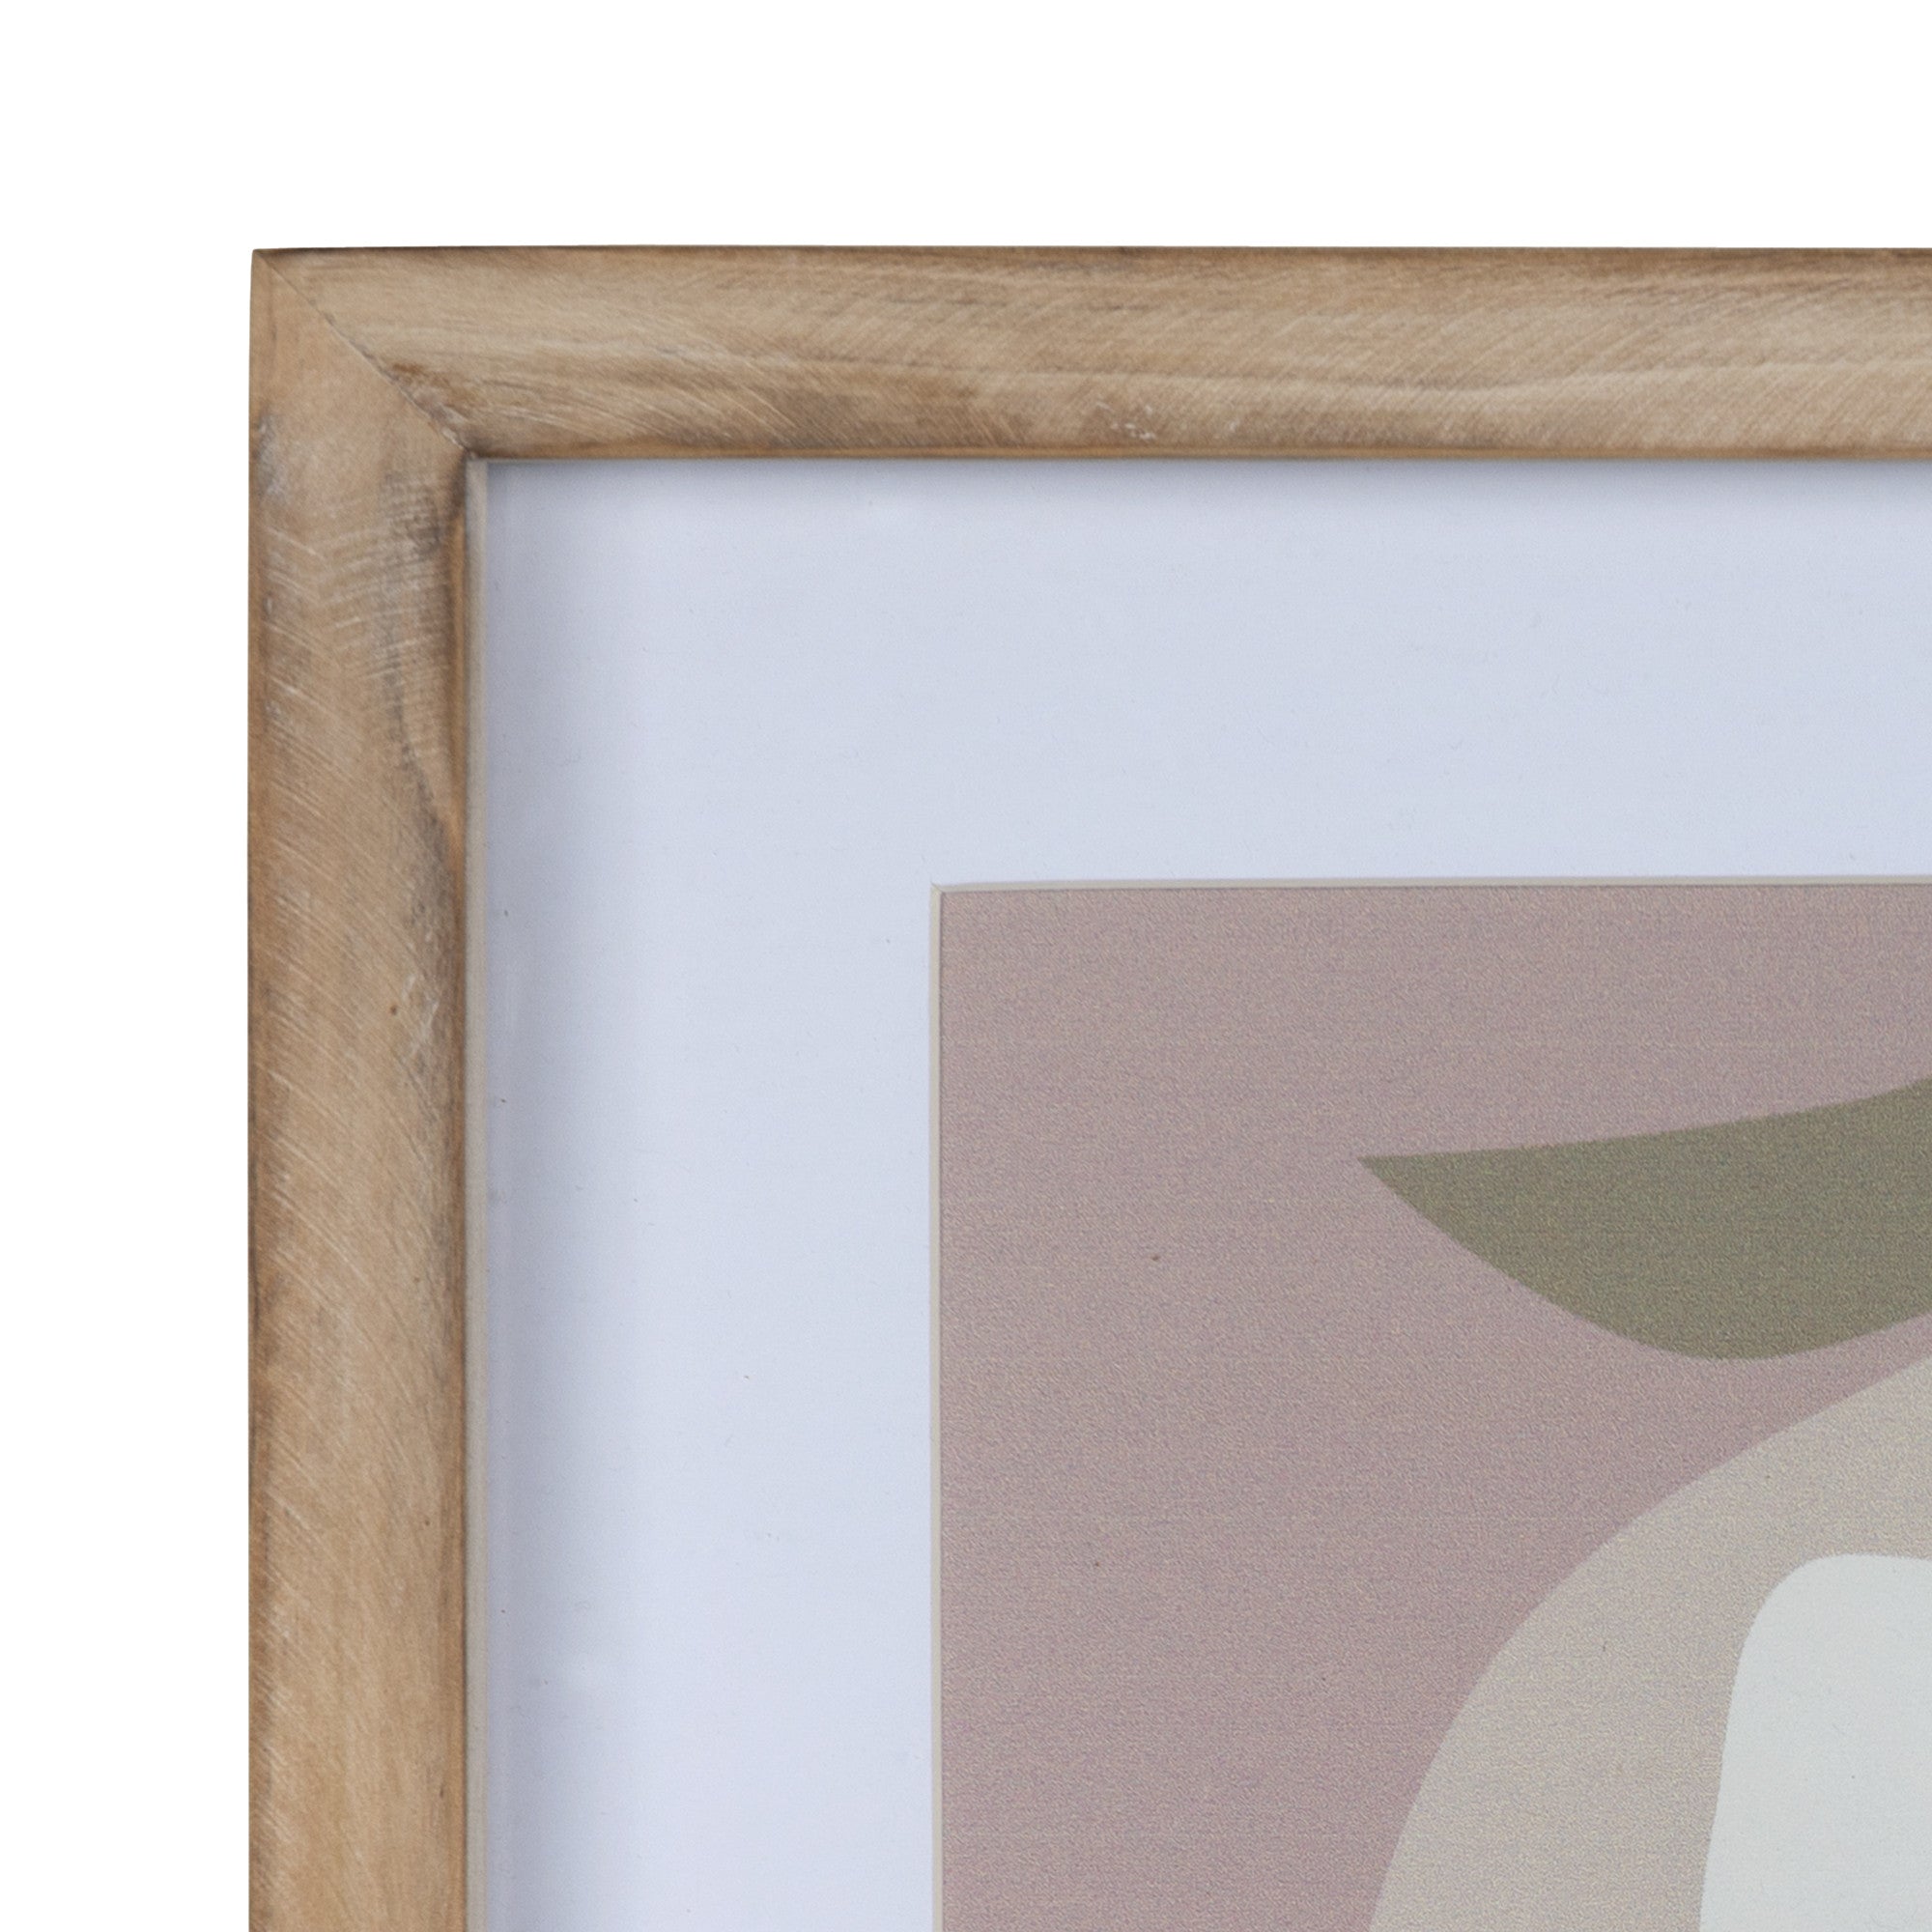 Pretty Lady With Hat Framed Wall Art